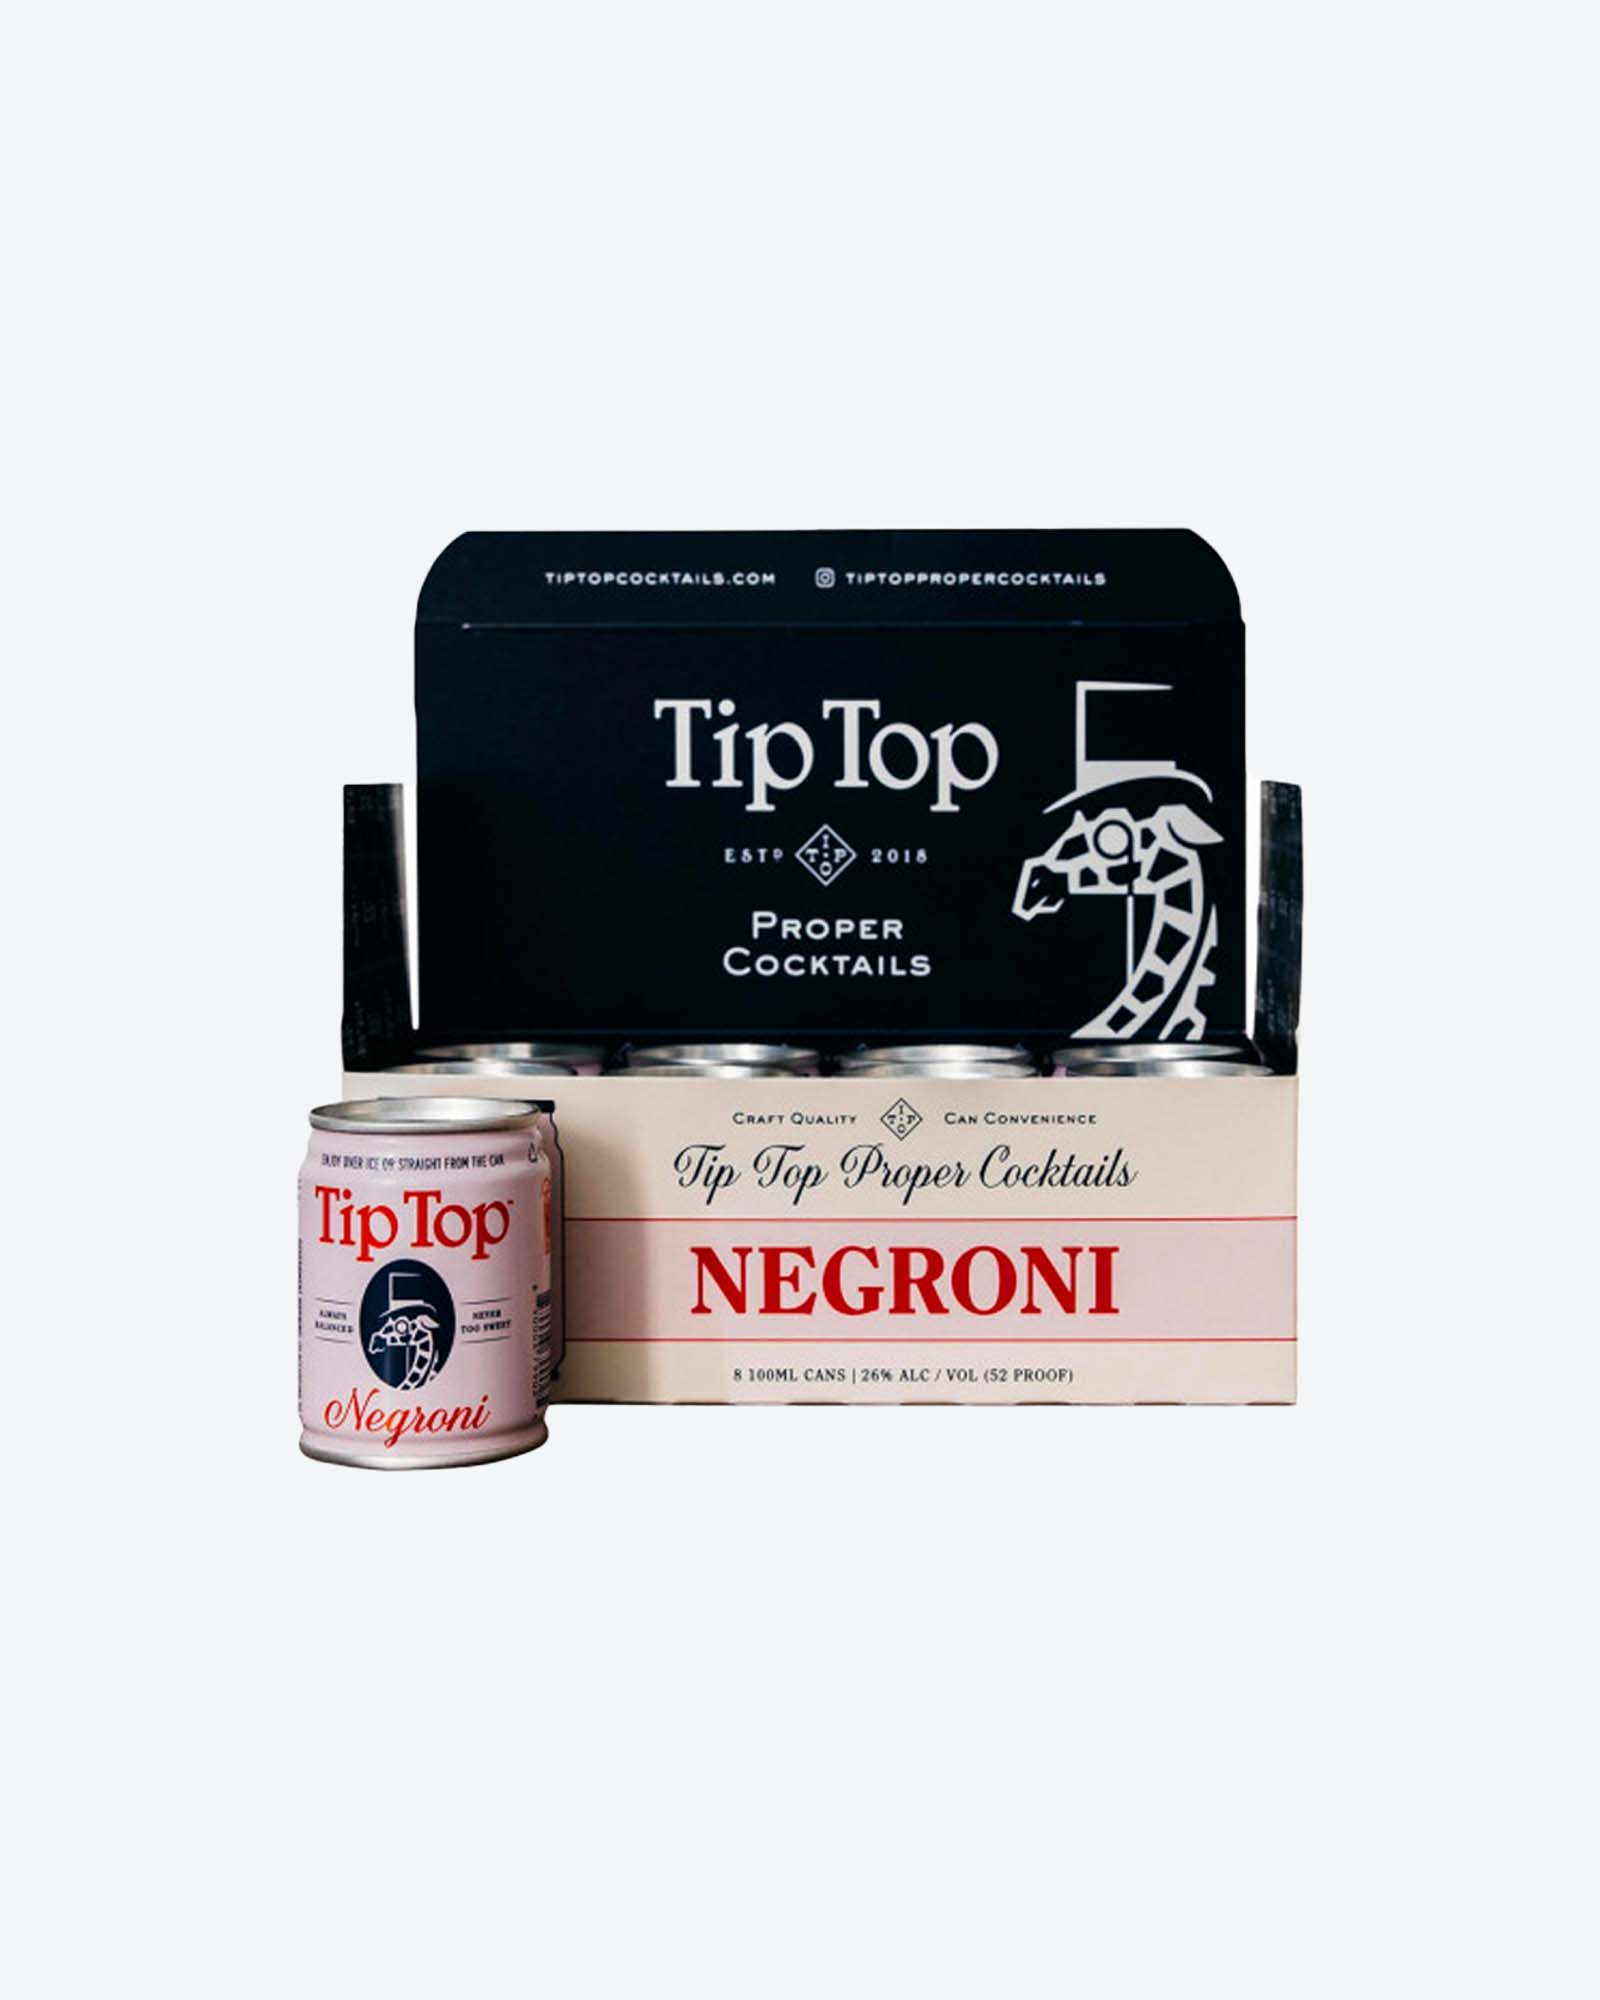 Tip Top Cocktails - Negroni 8pk Delivery & | Foxtrot